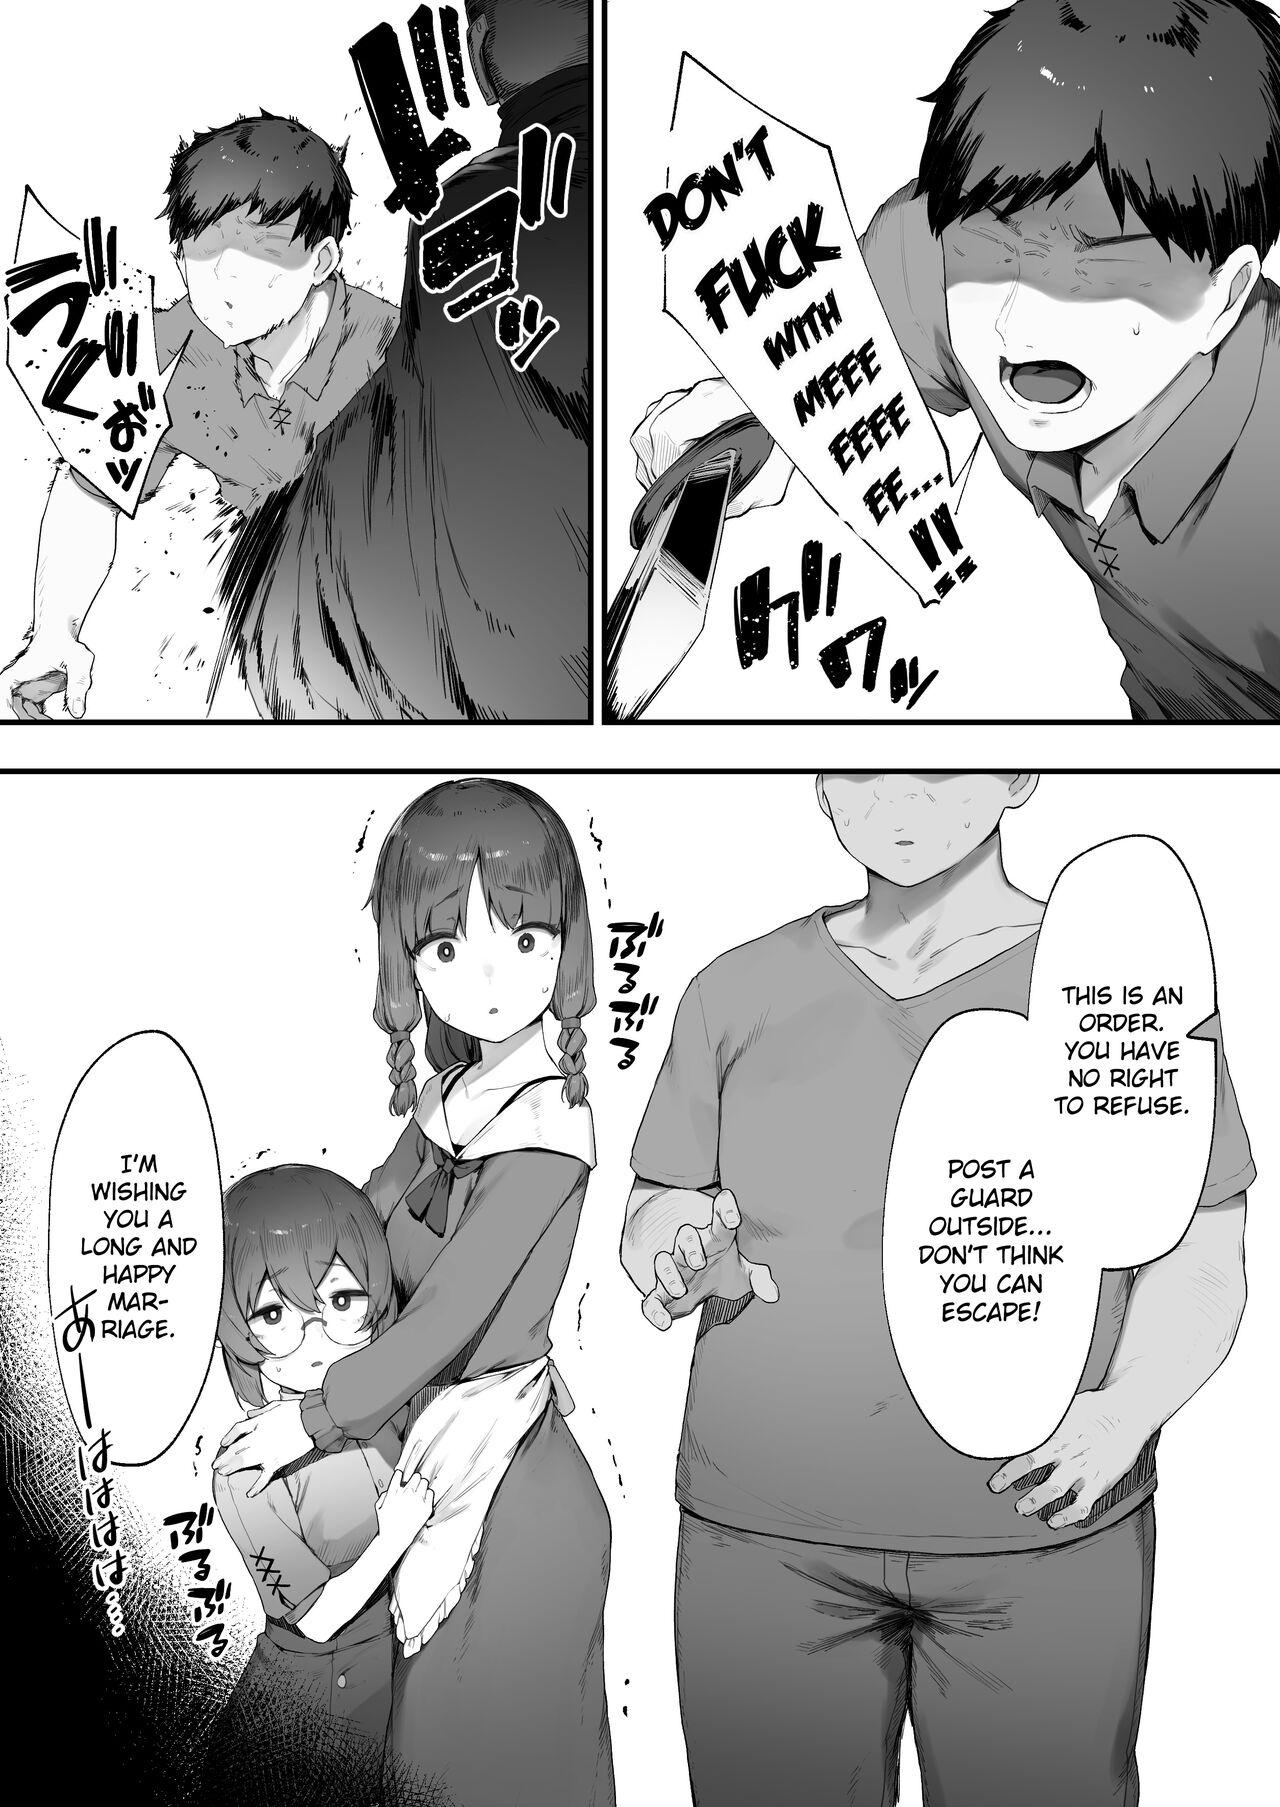 Cougar Oujo no Meirei de Stalker to Kekkon Saserareru Hanashi 1 | A story about being married to a stalker by the order of a princess 1 - Original Flaquita - Page 9